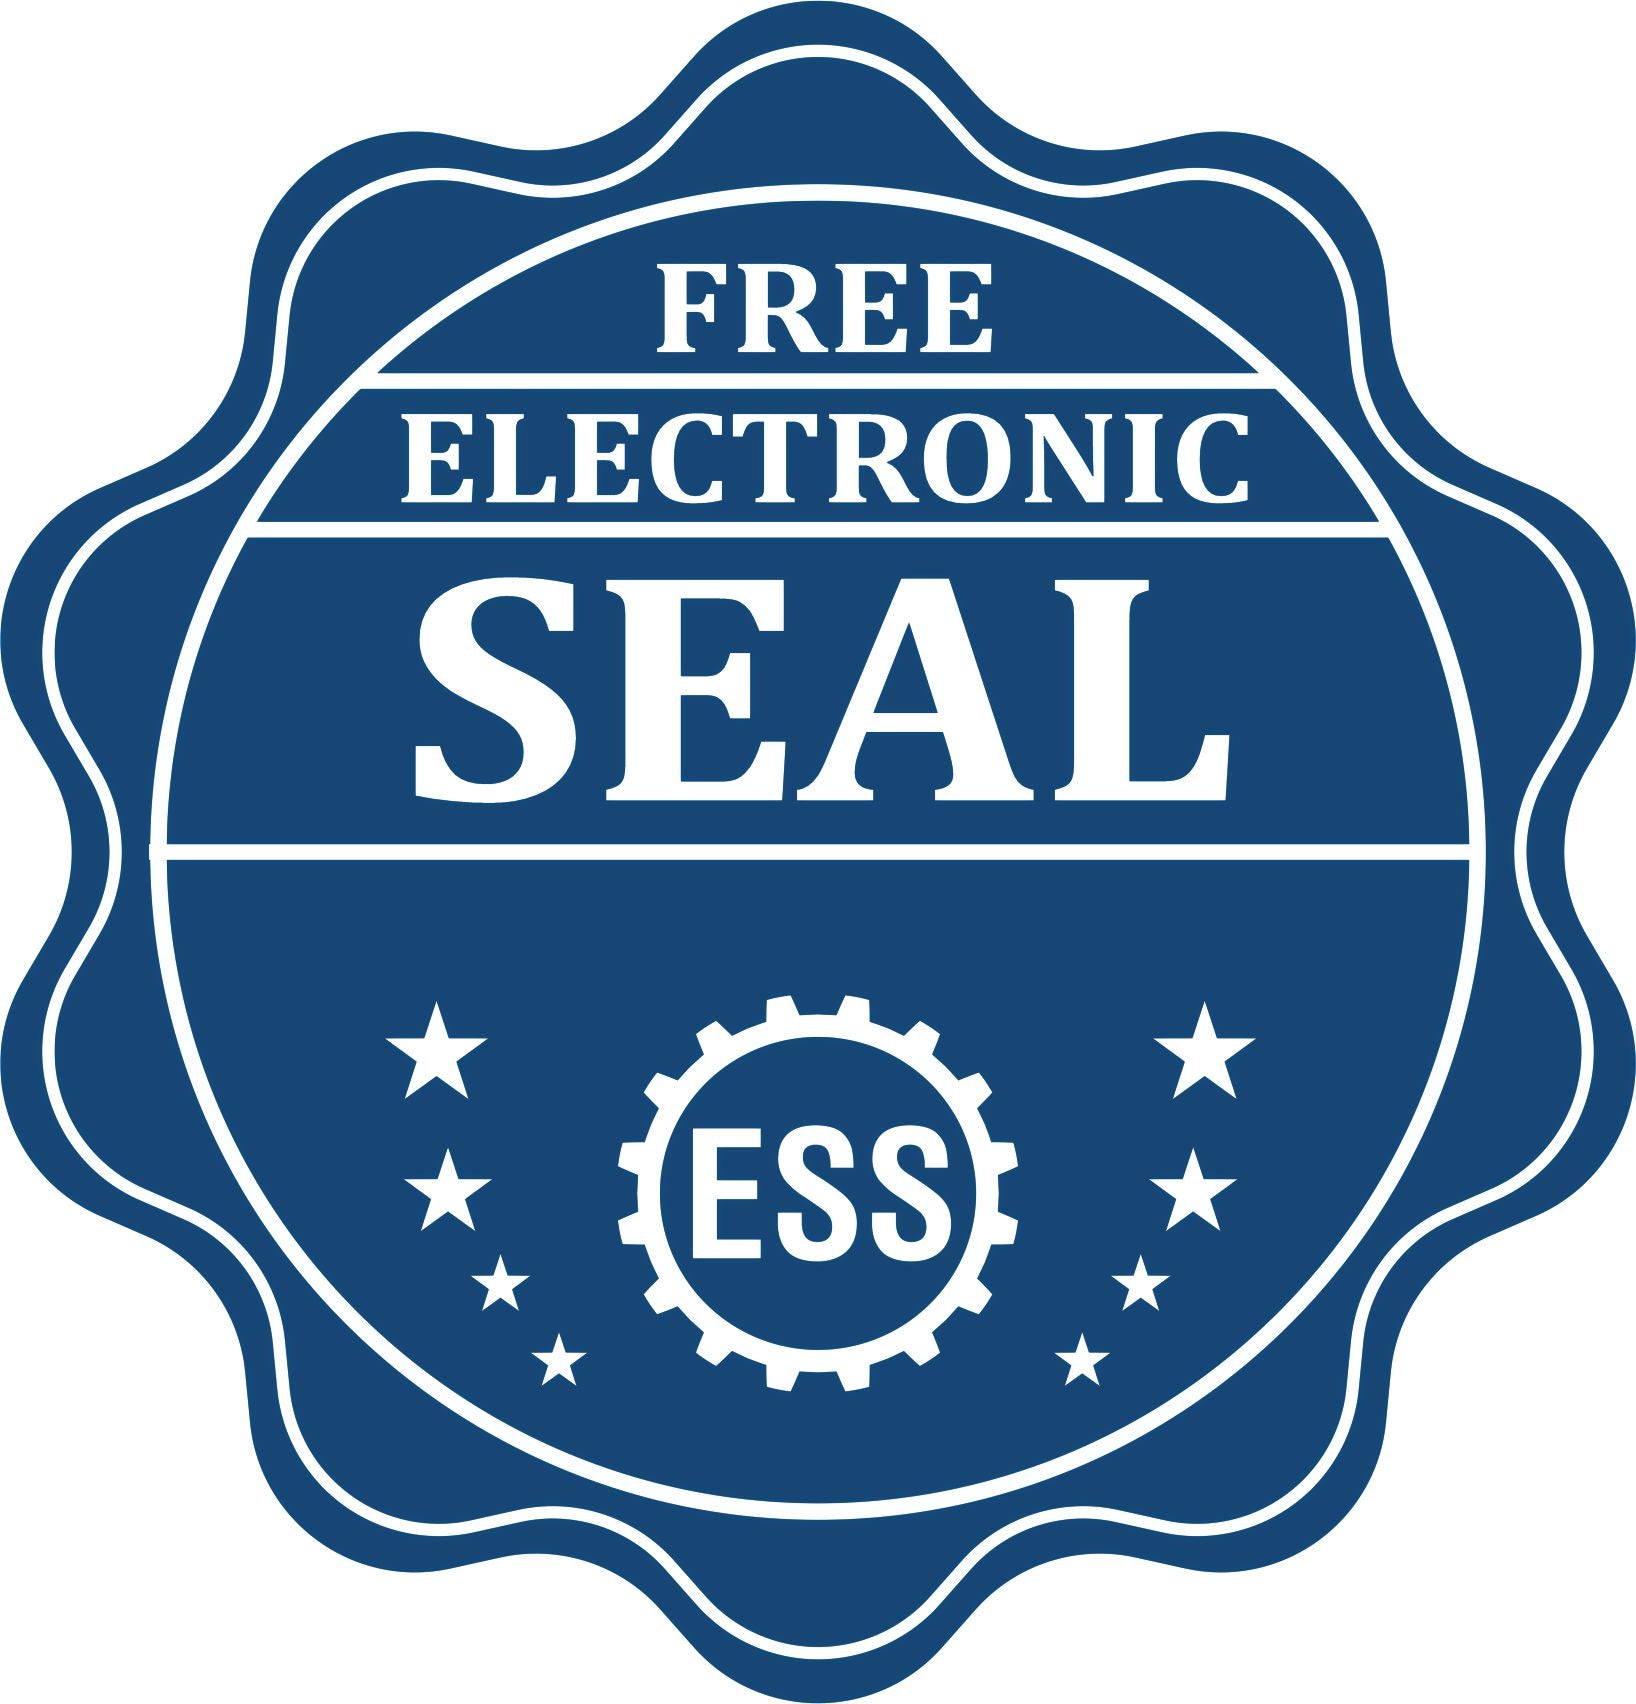 A badge showing a free electronic seal for the State of New Hampshire Extended Long Reach Geologist Seal with stars and the ESS gear on the emblem.